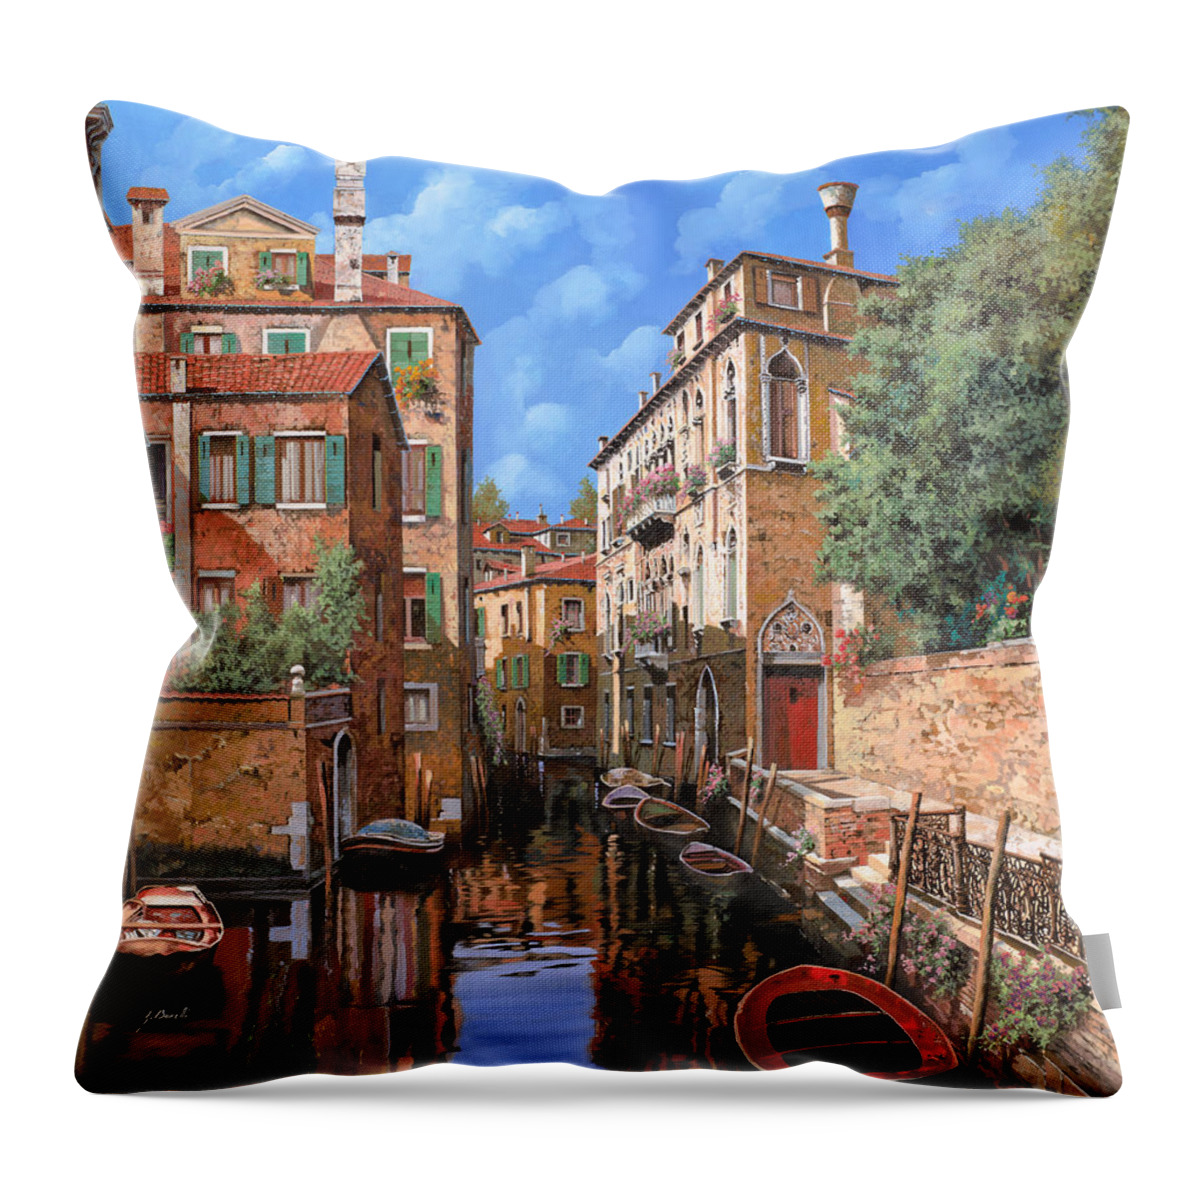 Venice Throw Pillow featuring the painting Luci Di Venezia by Guido Borelli